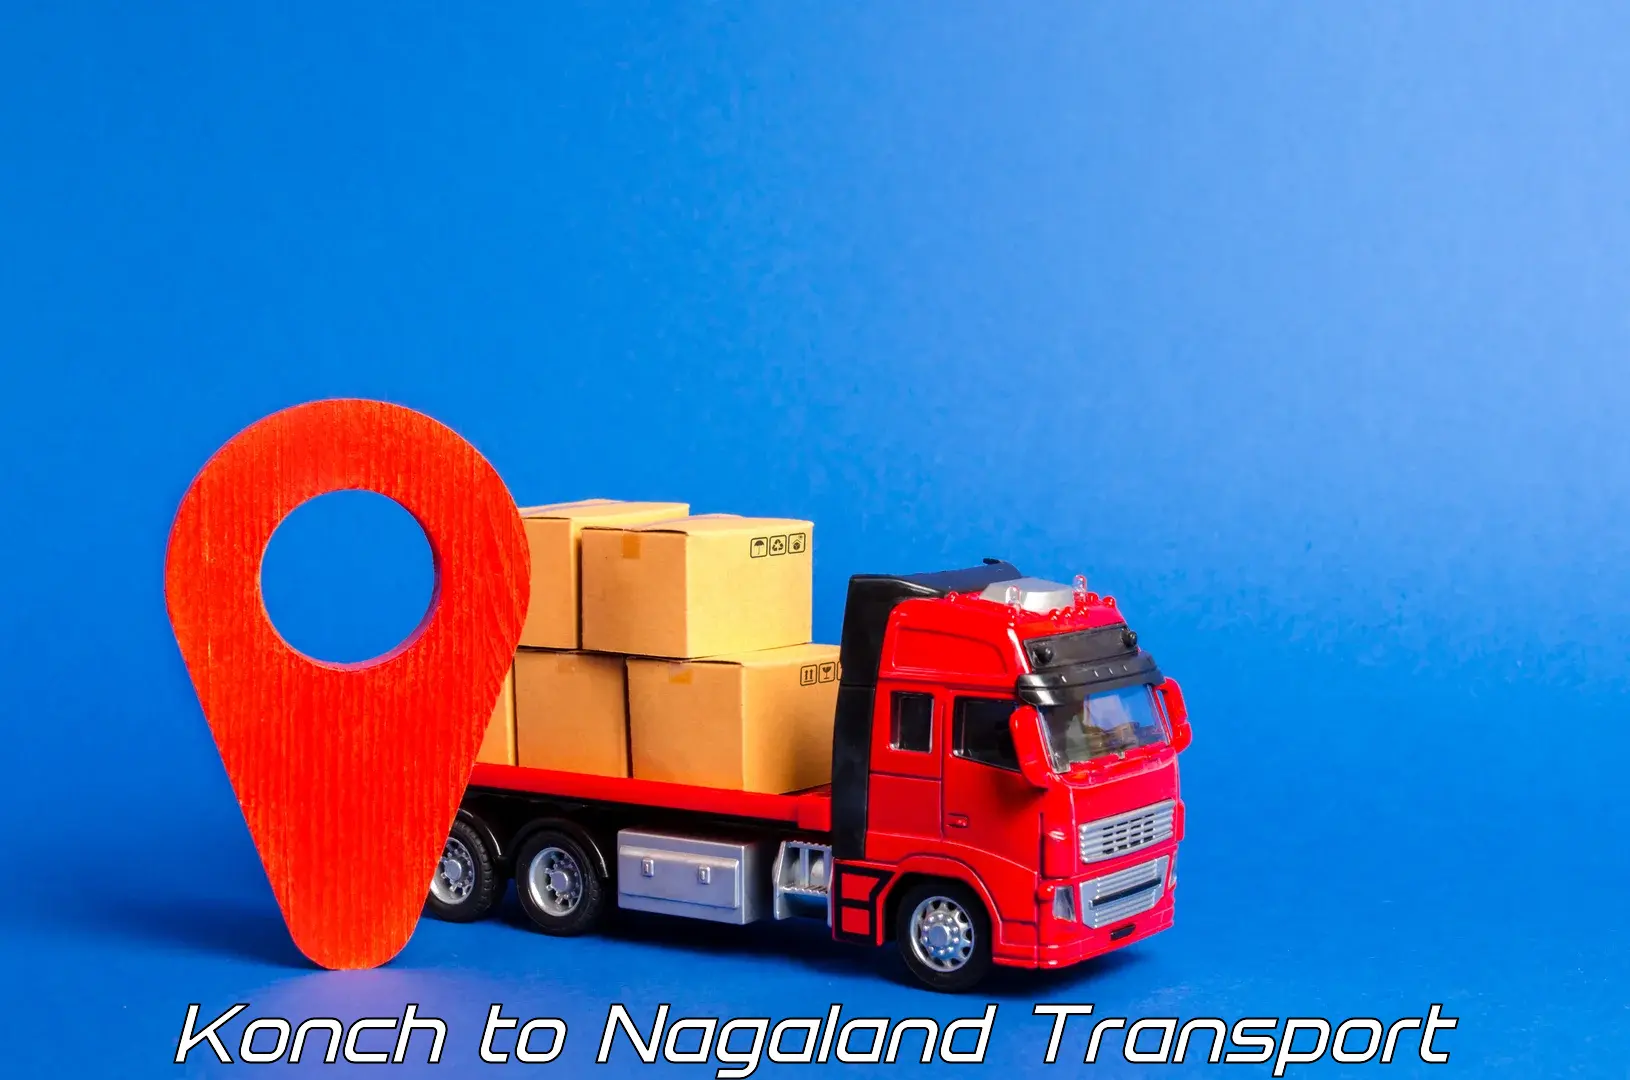 Nationwide transport services Konch to Nagaland